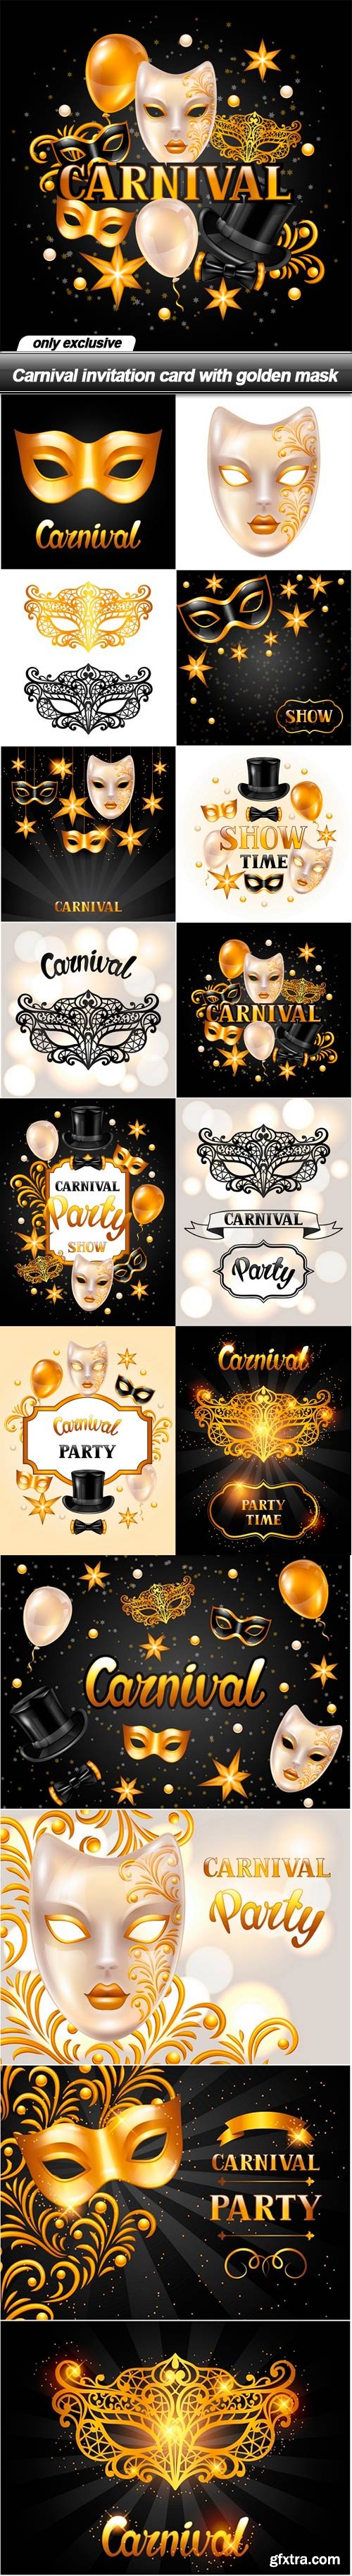 Carnival invitation card with golden mask - 16 EPS